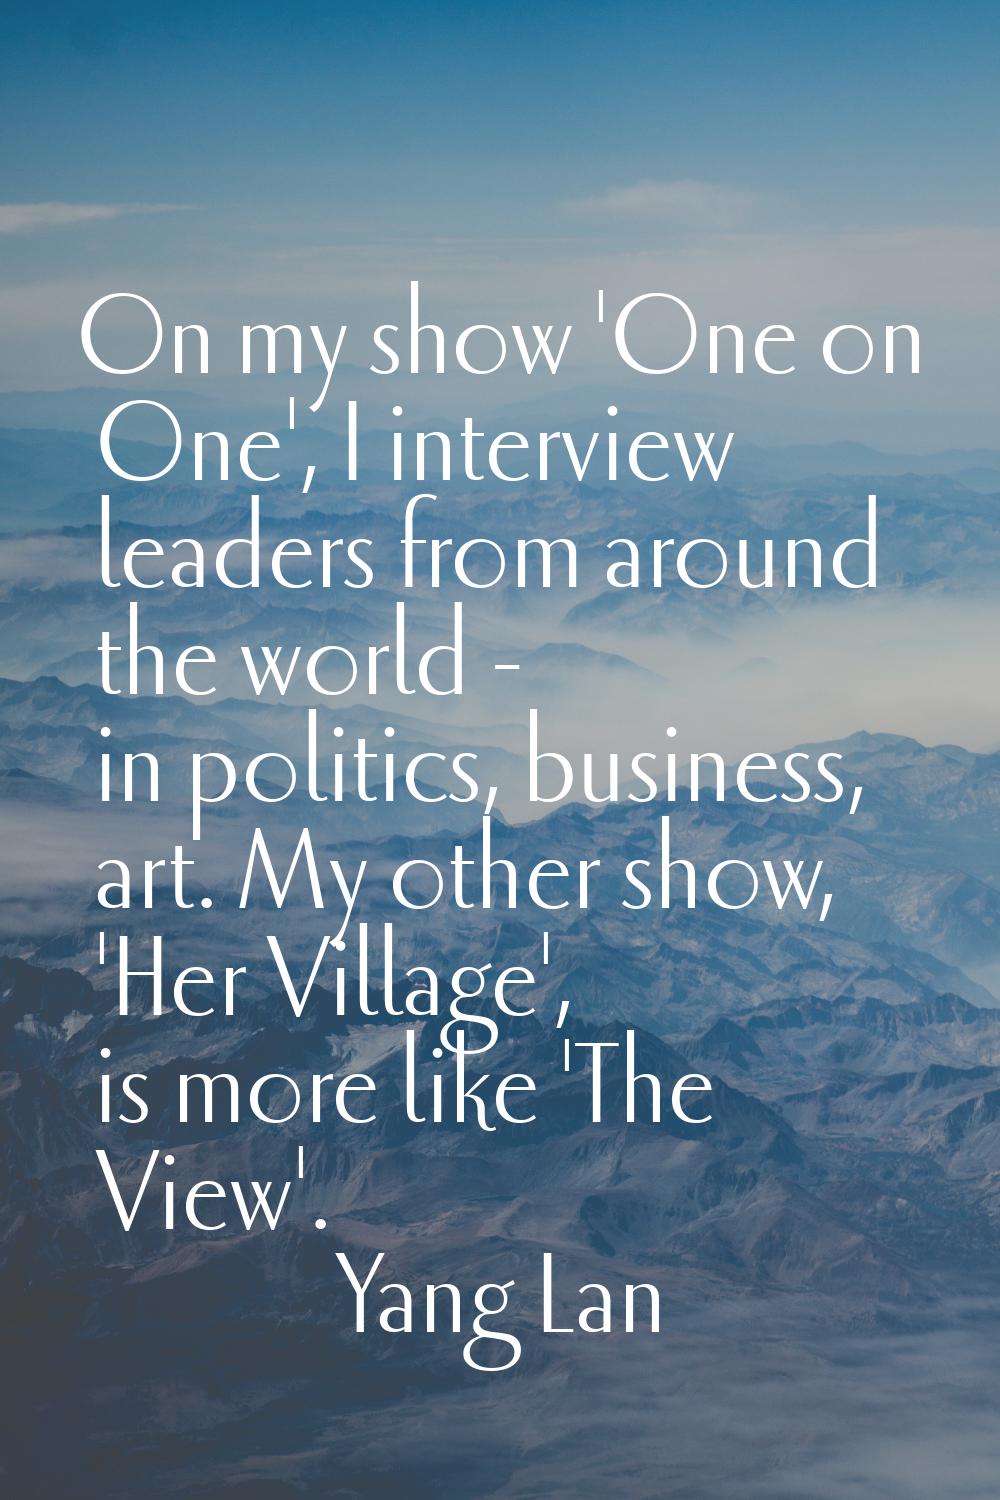 On my show 'One on One', I interview leaders from around the world - in politics, business, art. My